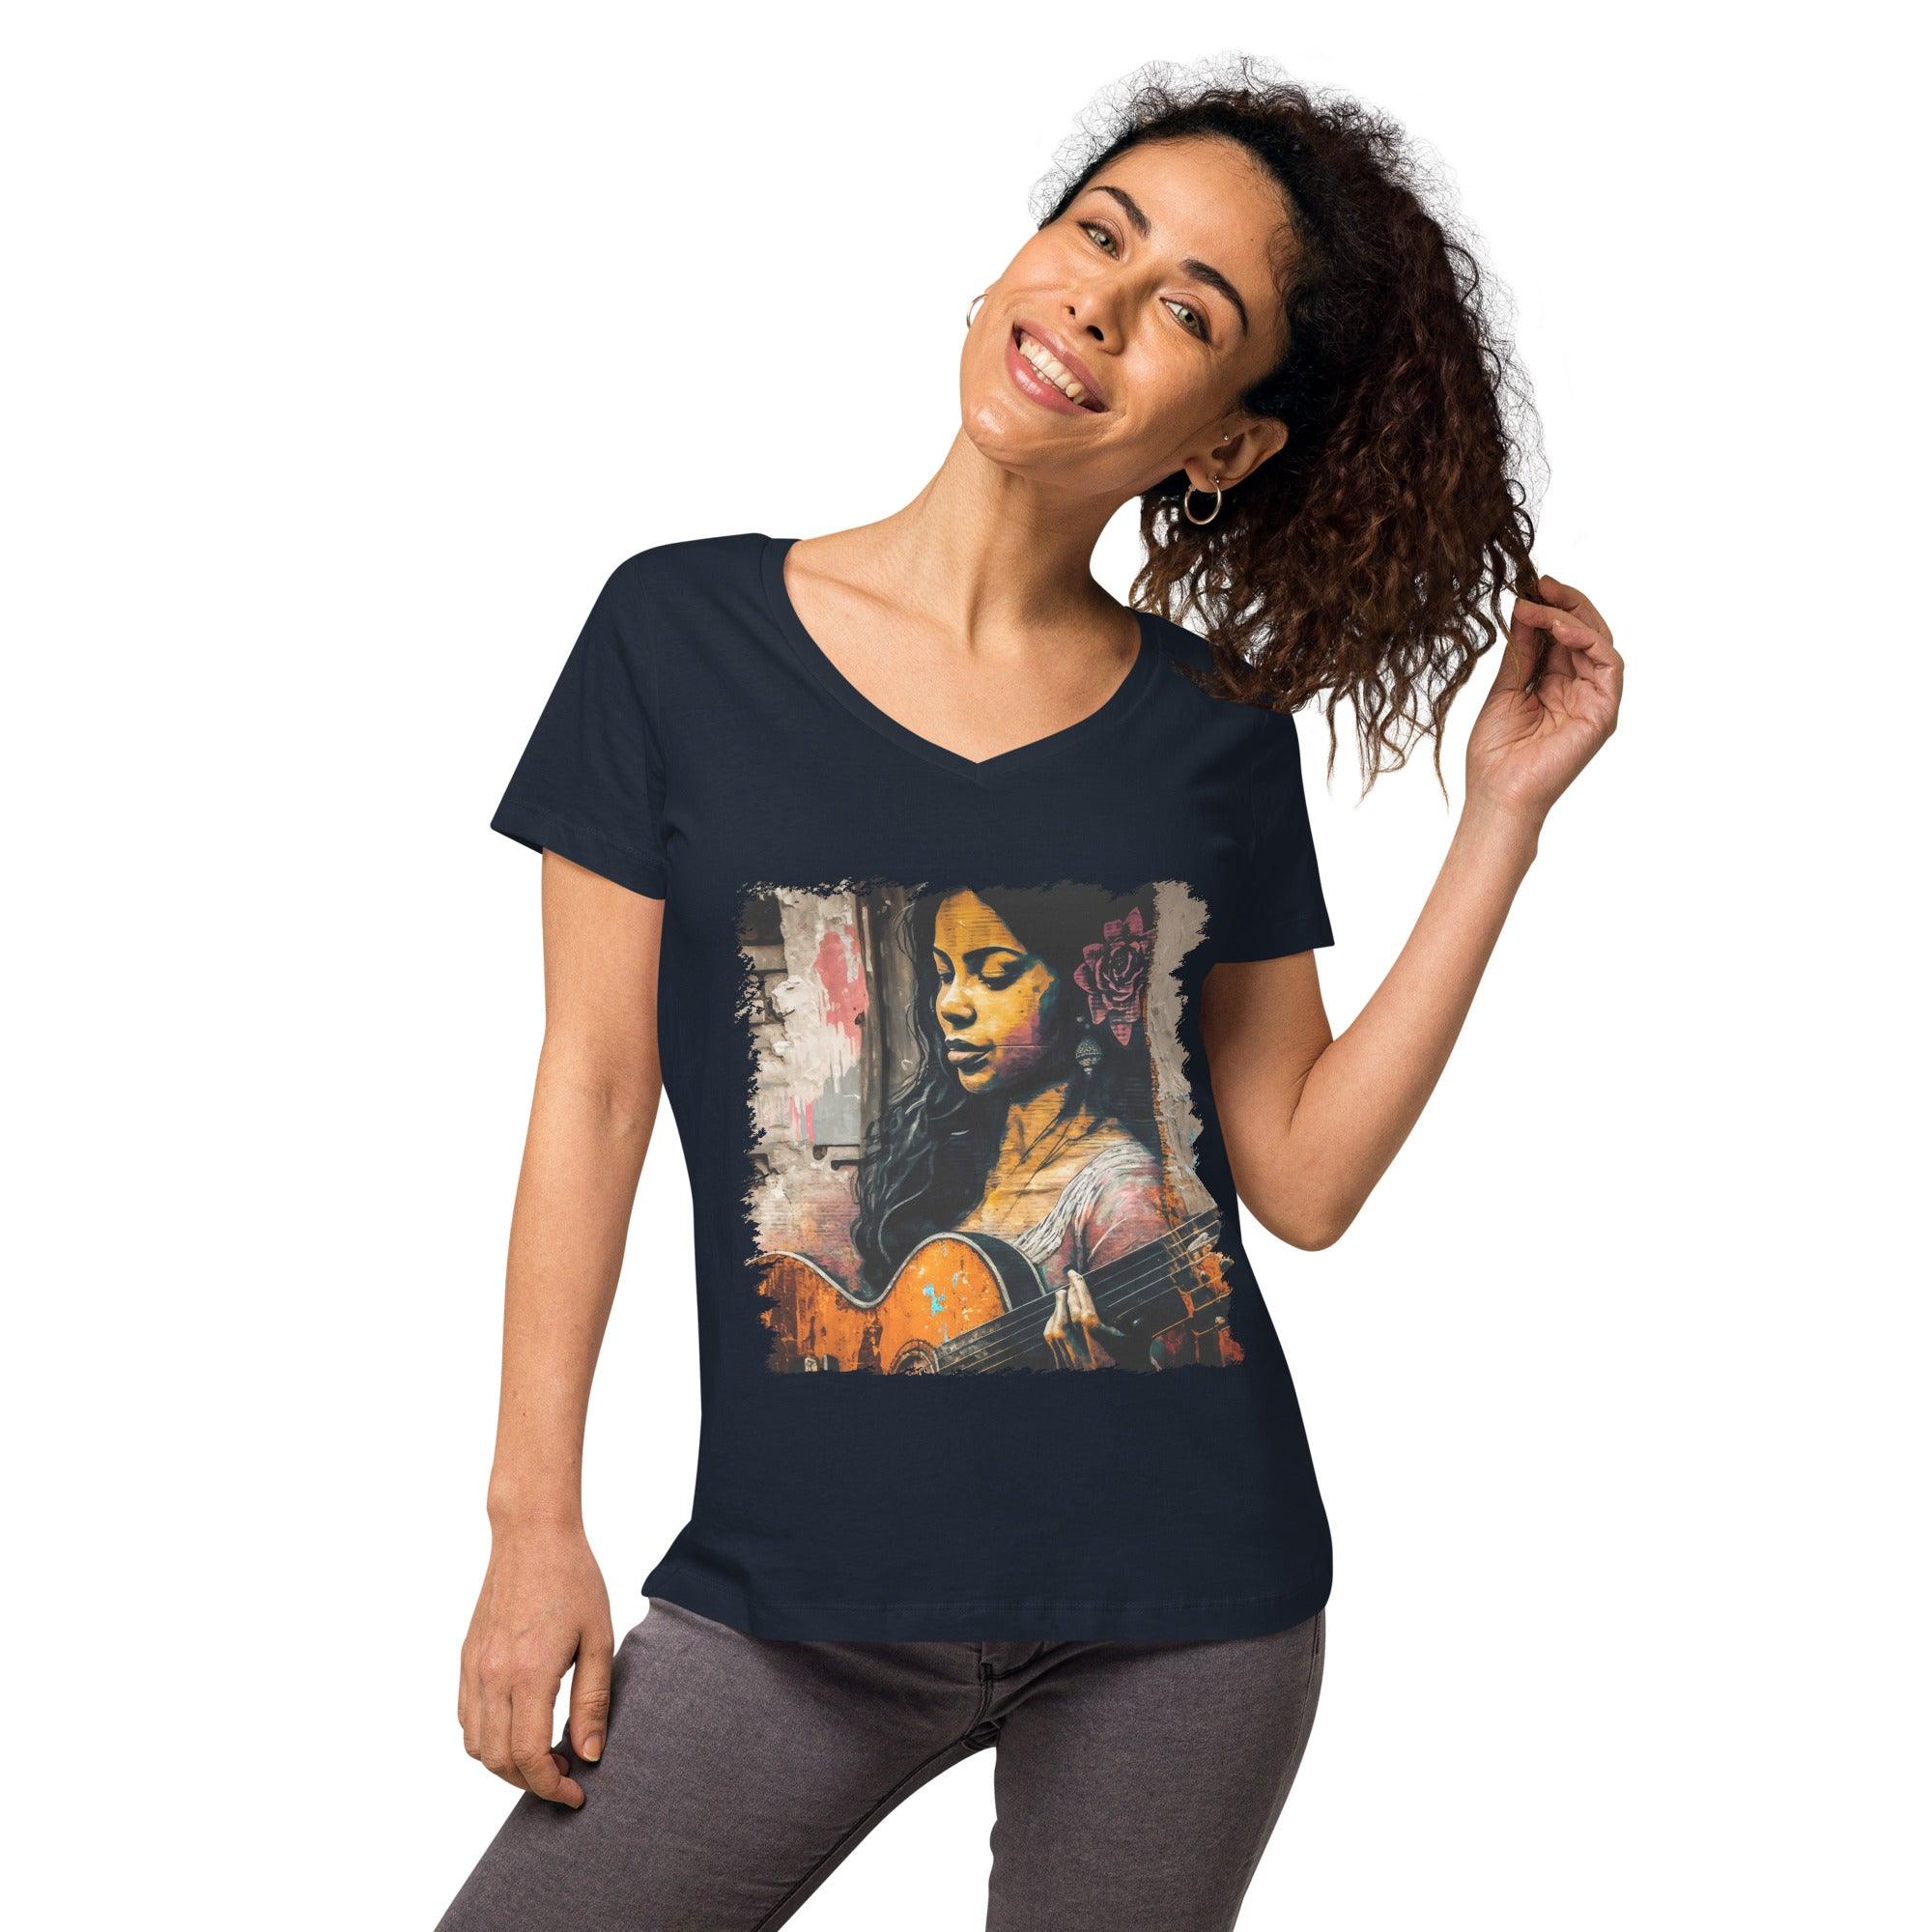 She Strums With Soul Women’s Fitted V-neck T-shirt - Beyond T-shirts